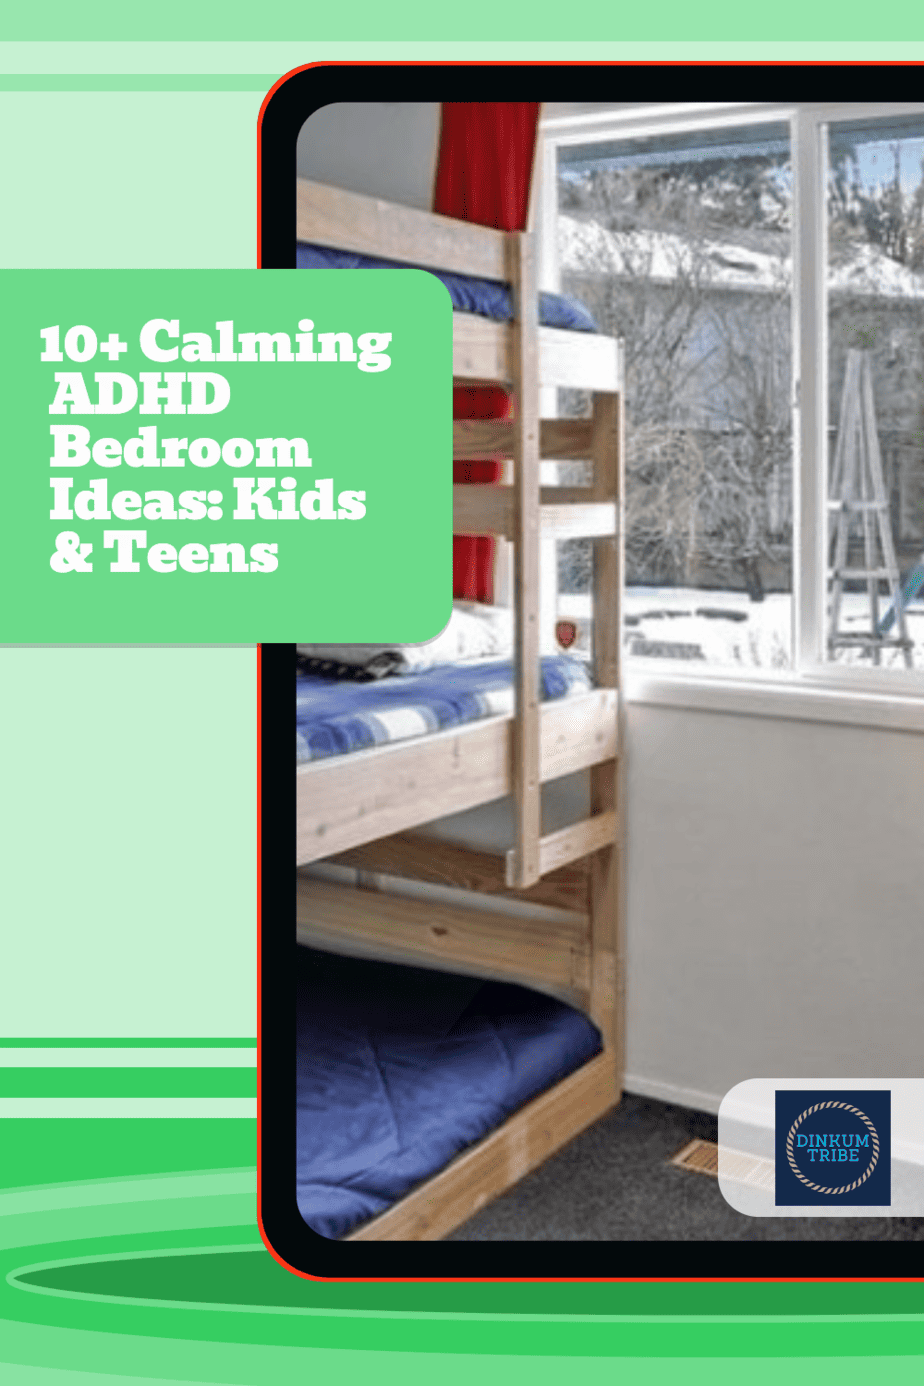 Pinnable image for calming ADHD bedroom ideas.